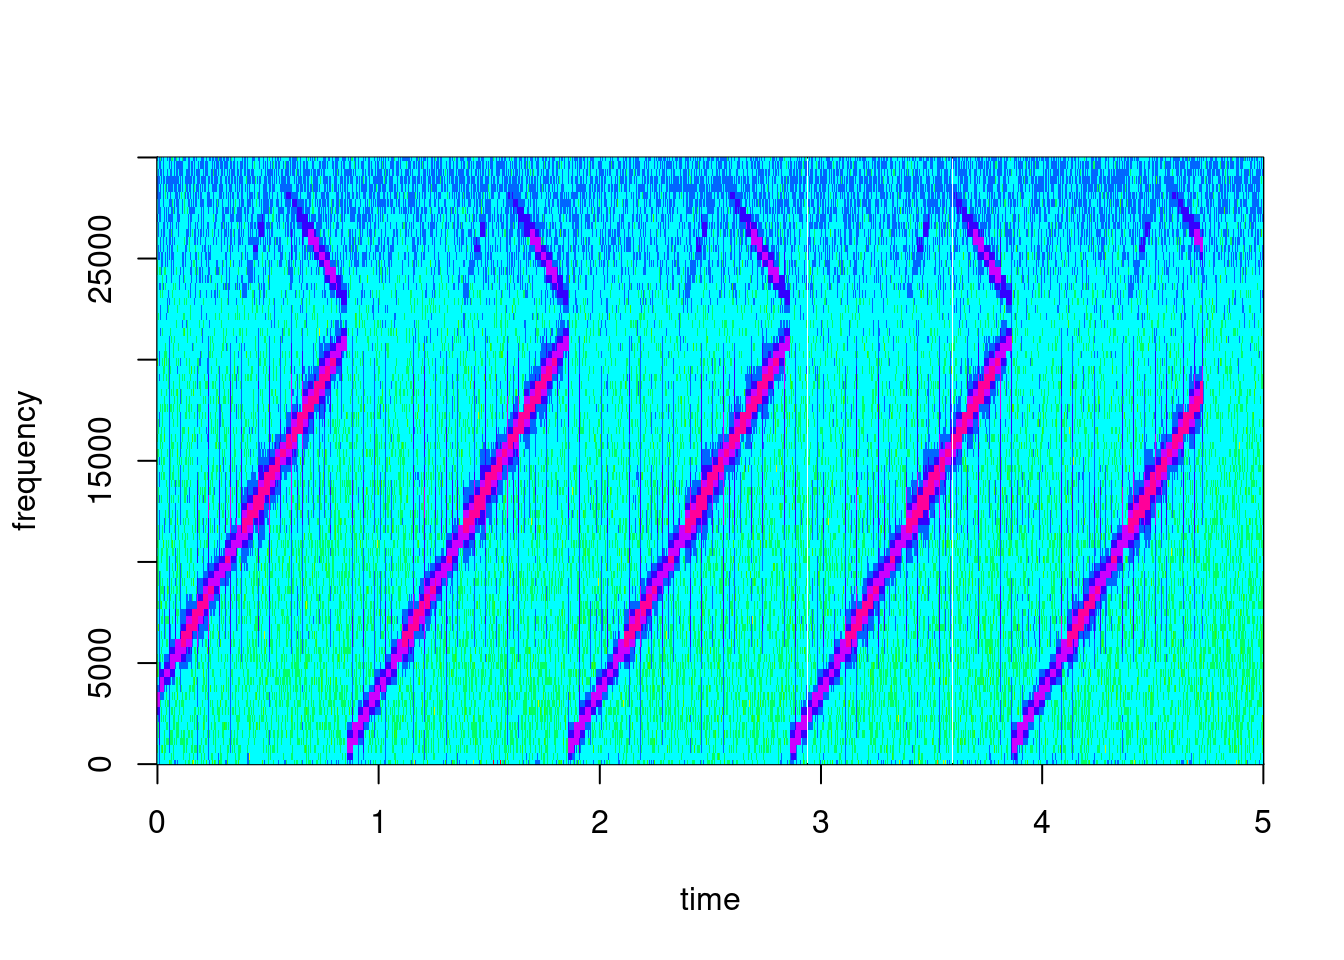 Detail of the spectrogram of the recorded test file